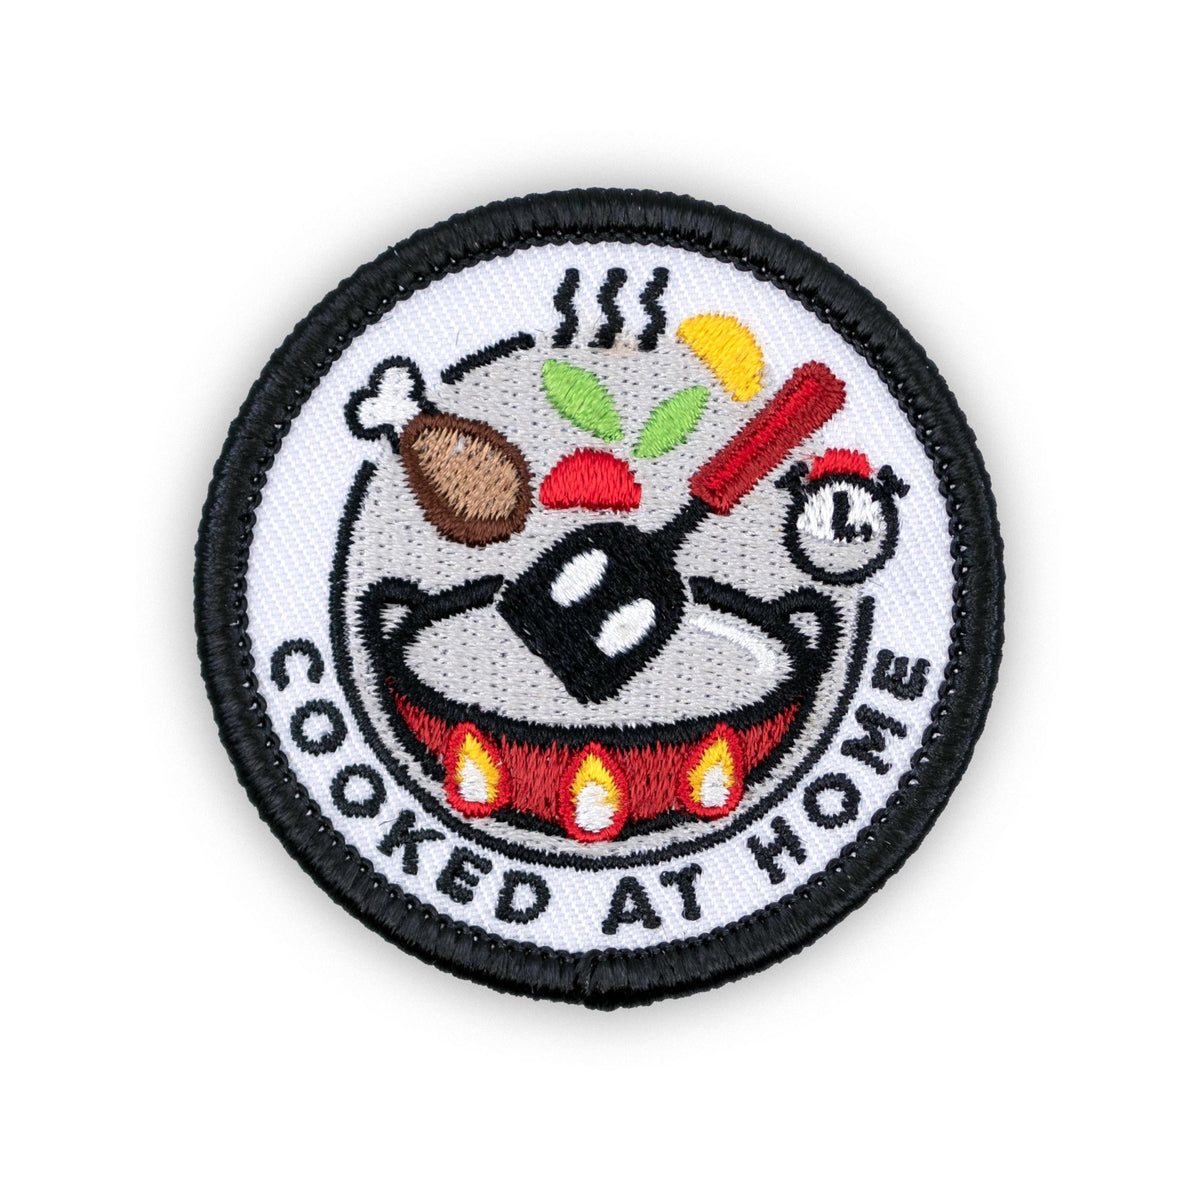 Cooked At Home adulting merit badge patch for adults